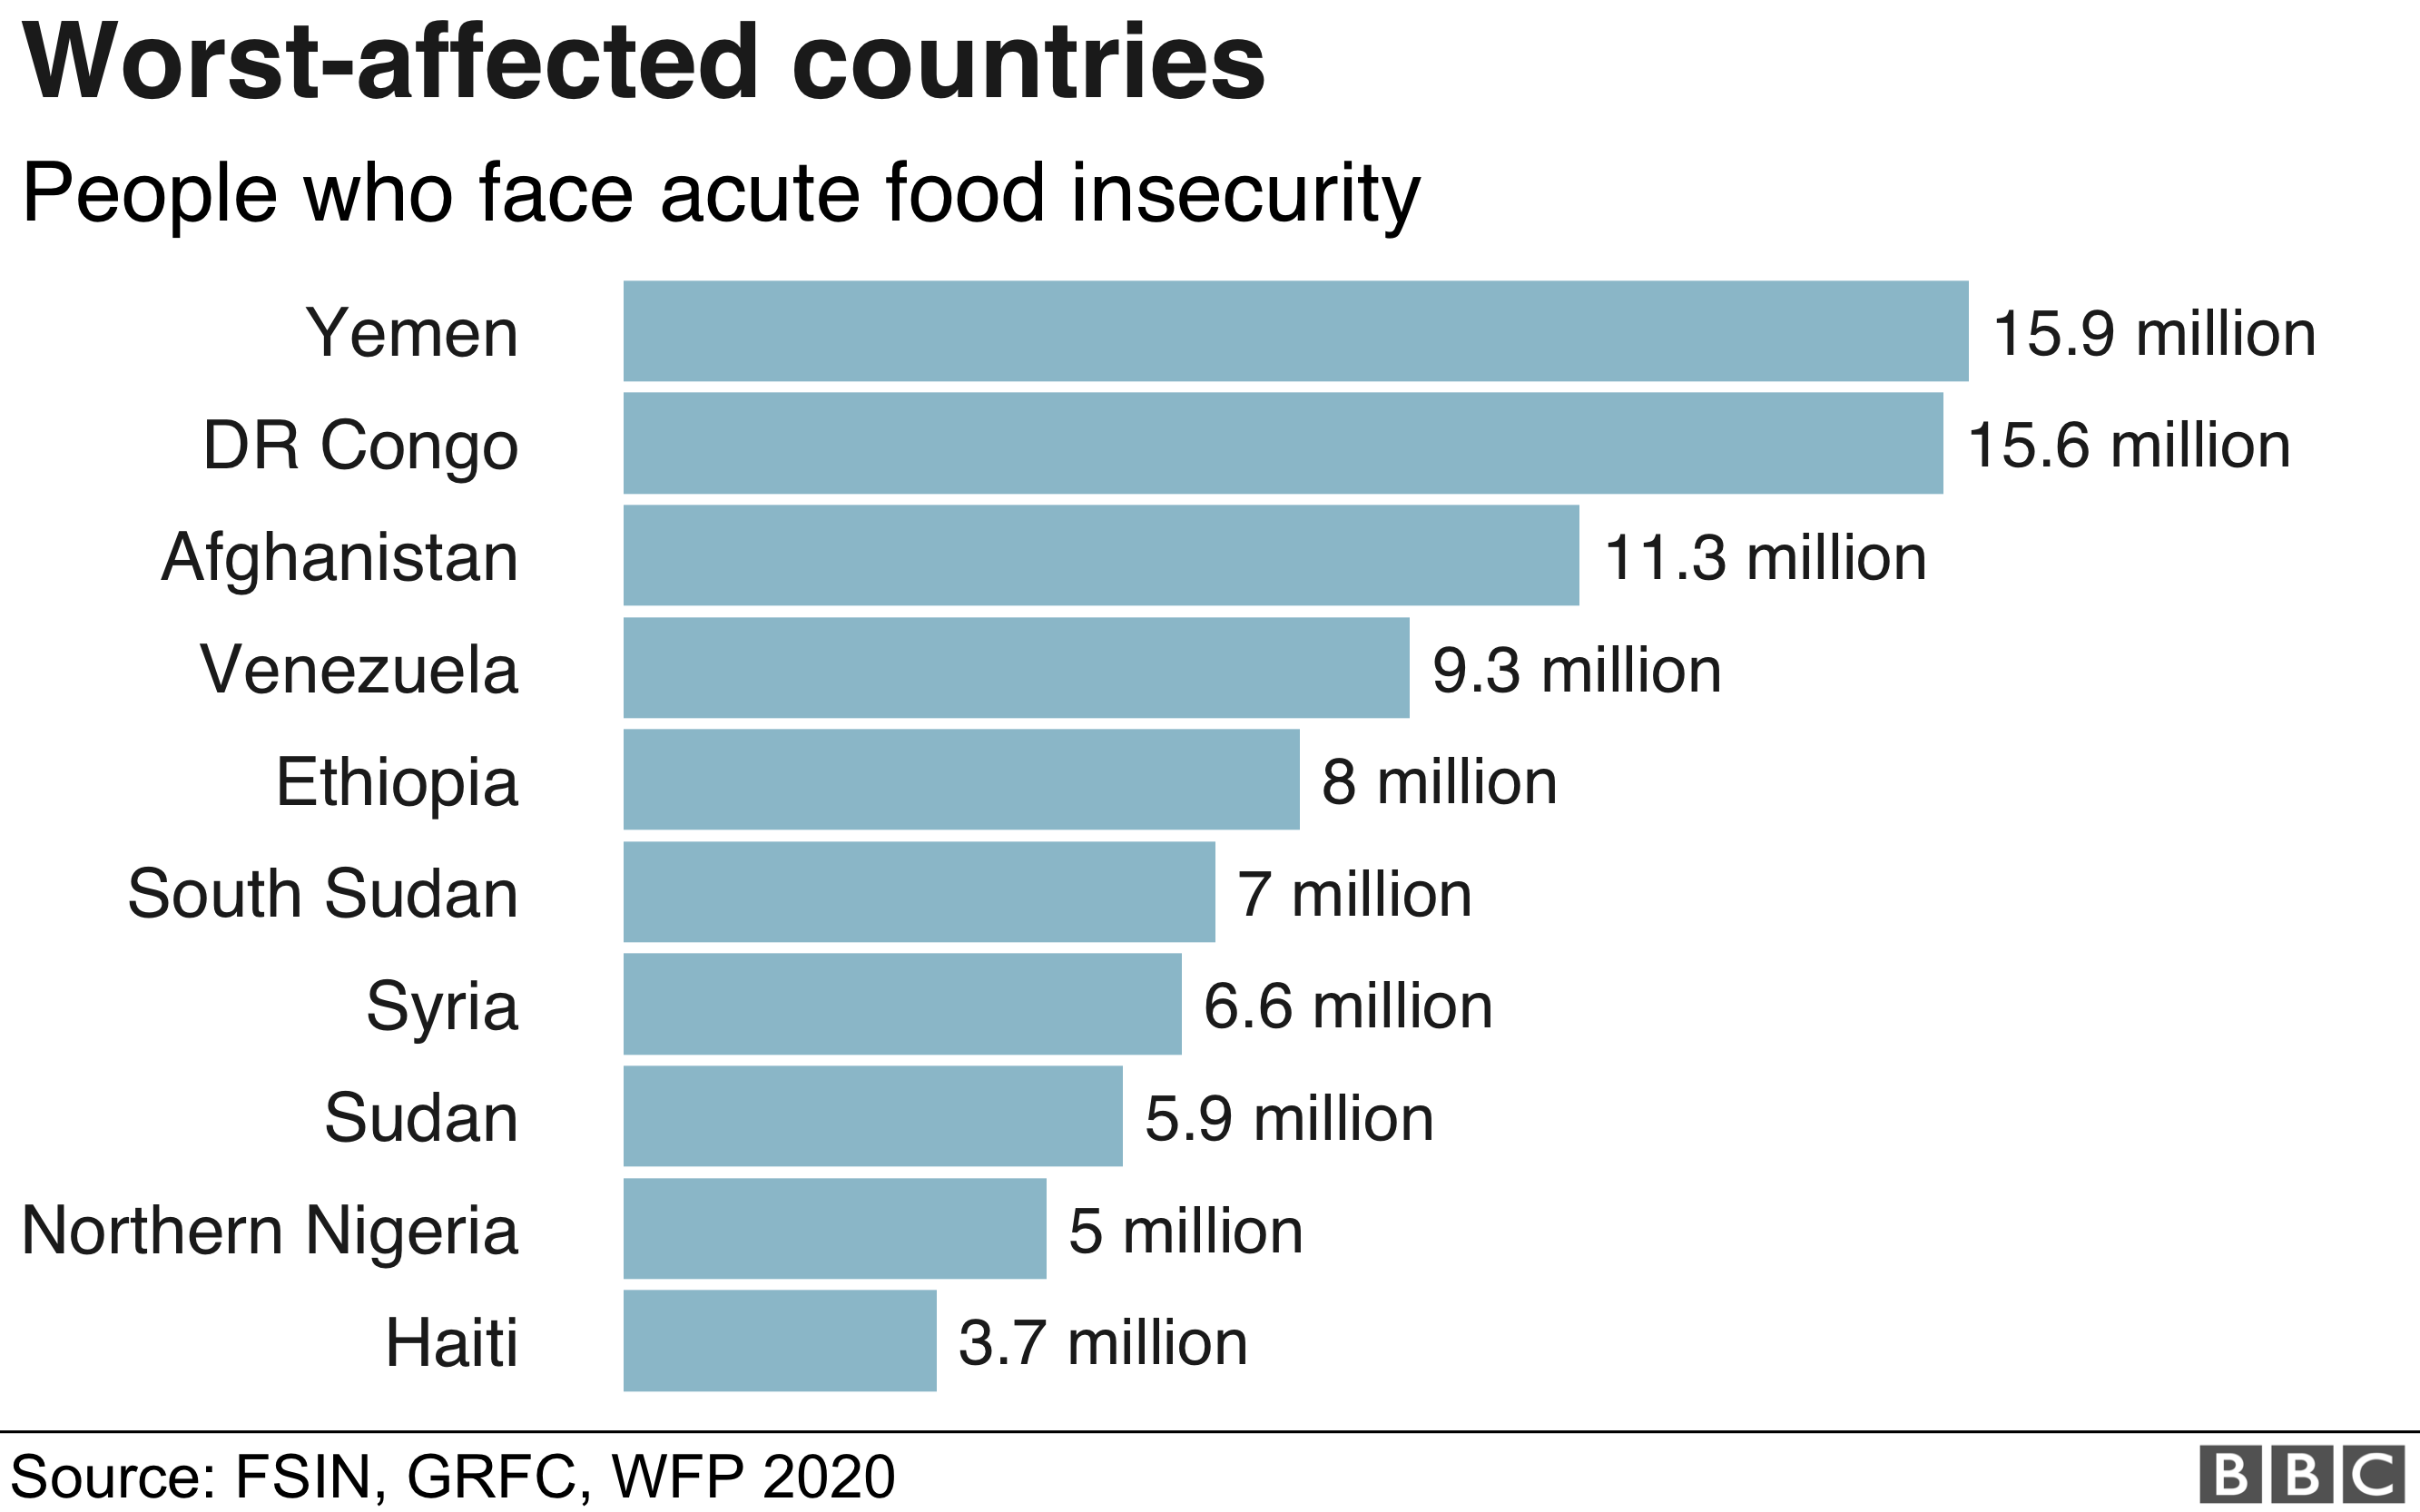 Chart showing worst-affected countries